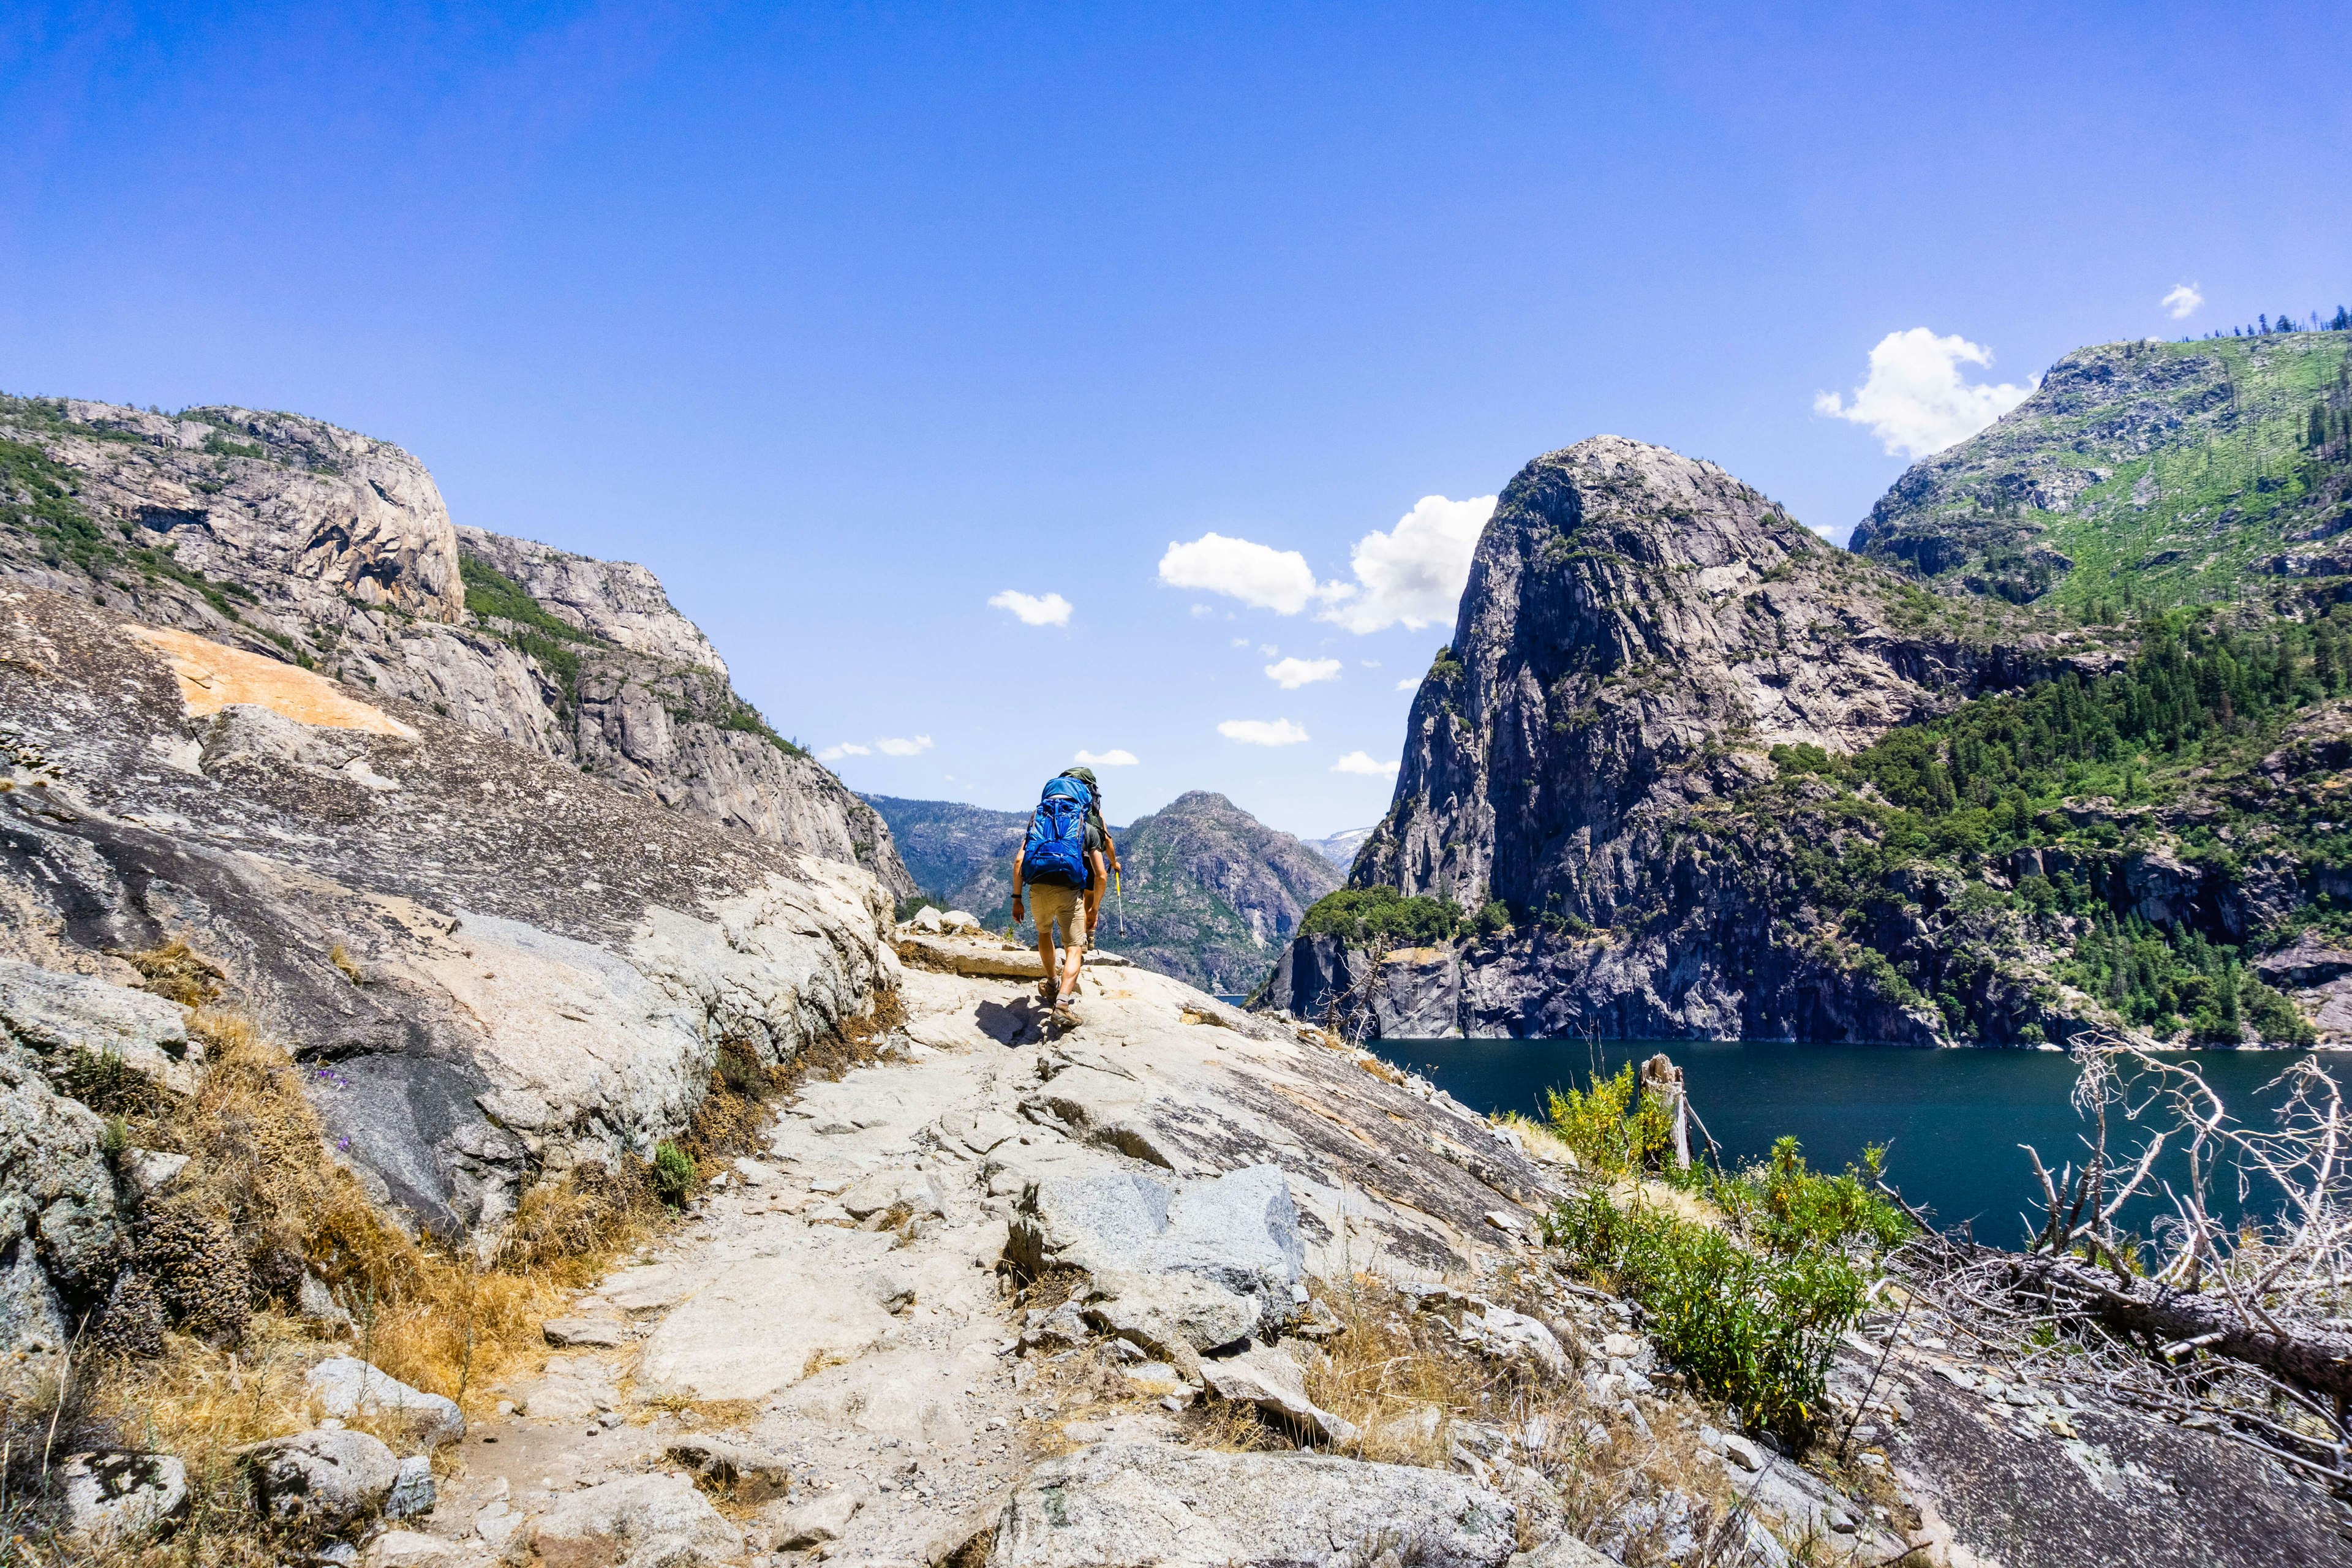 A person seen from behind, hiking on the shoreline of Hetch Hetchy reservoir in Yosemite National Park, Sierra Nevada mountains, California. The reservoir is one of the main sources of drinking water for the San Francisco bay.